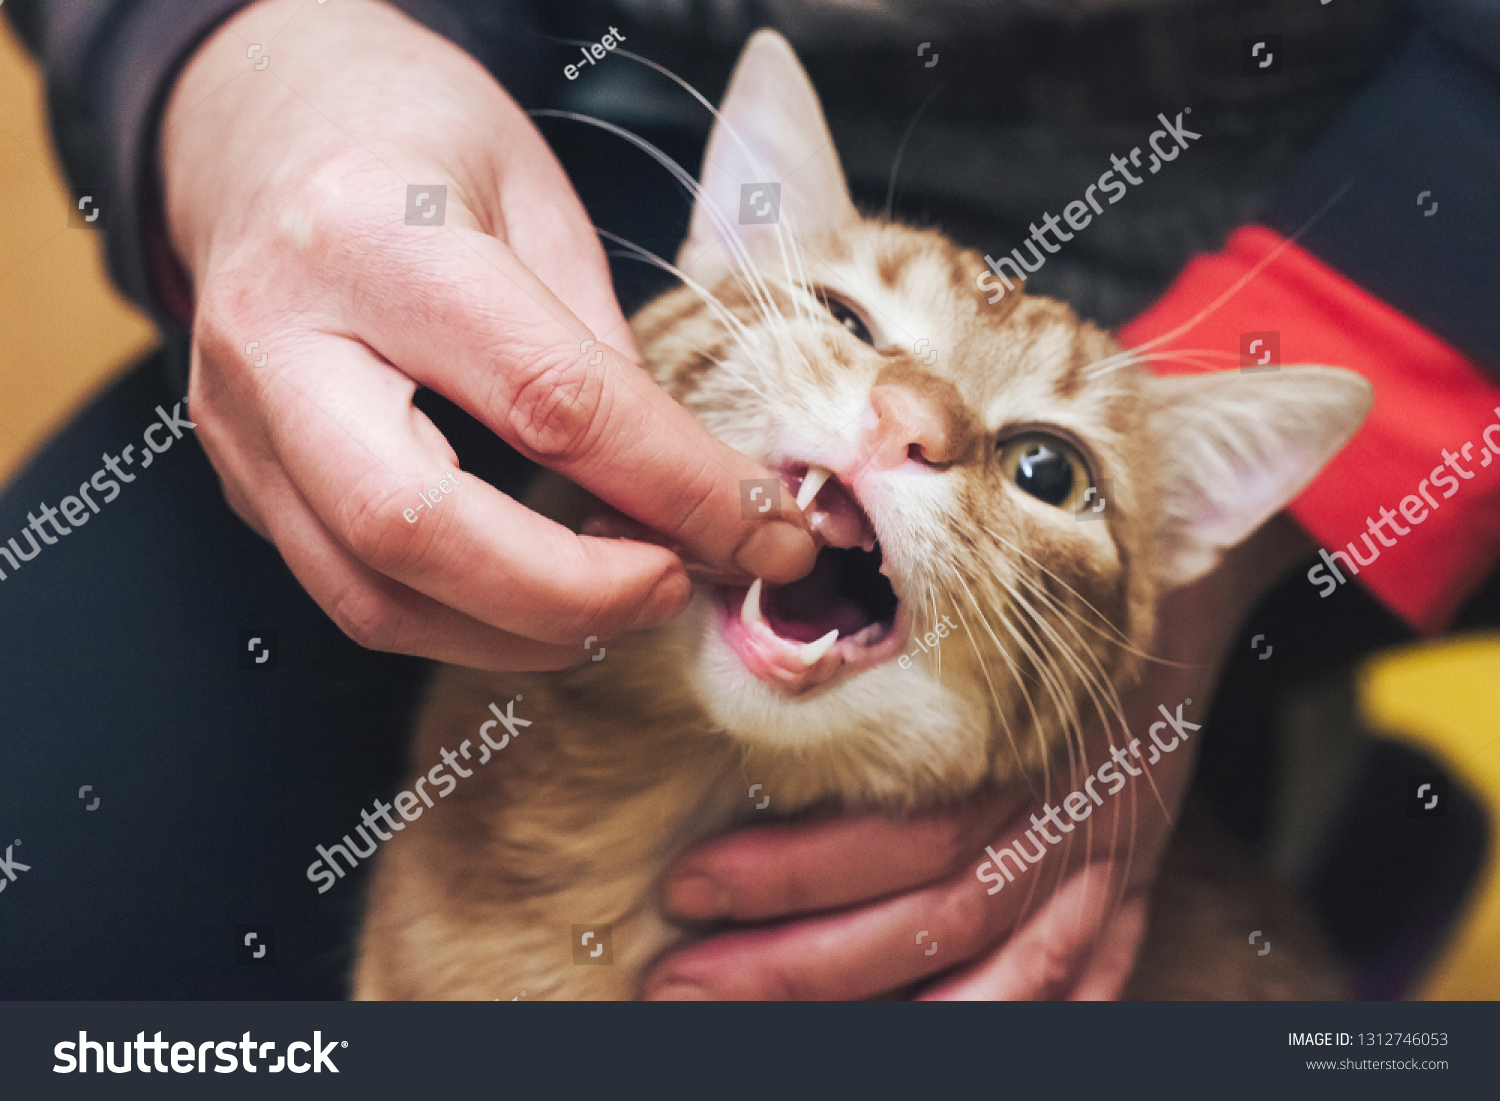 cat does not want to eat